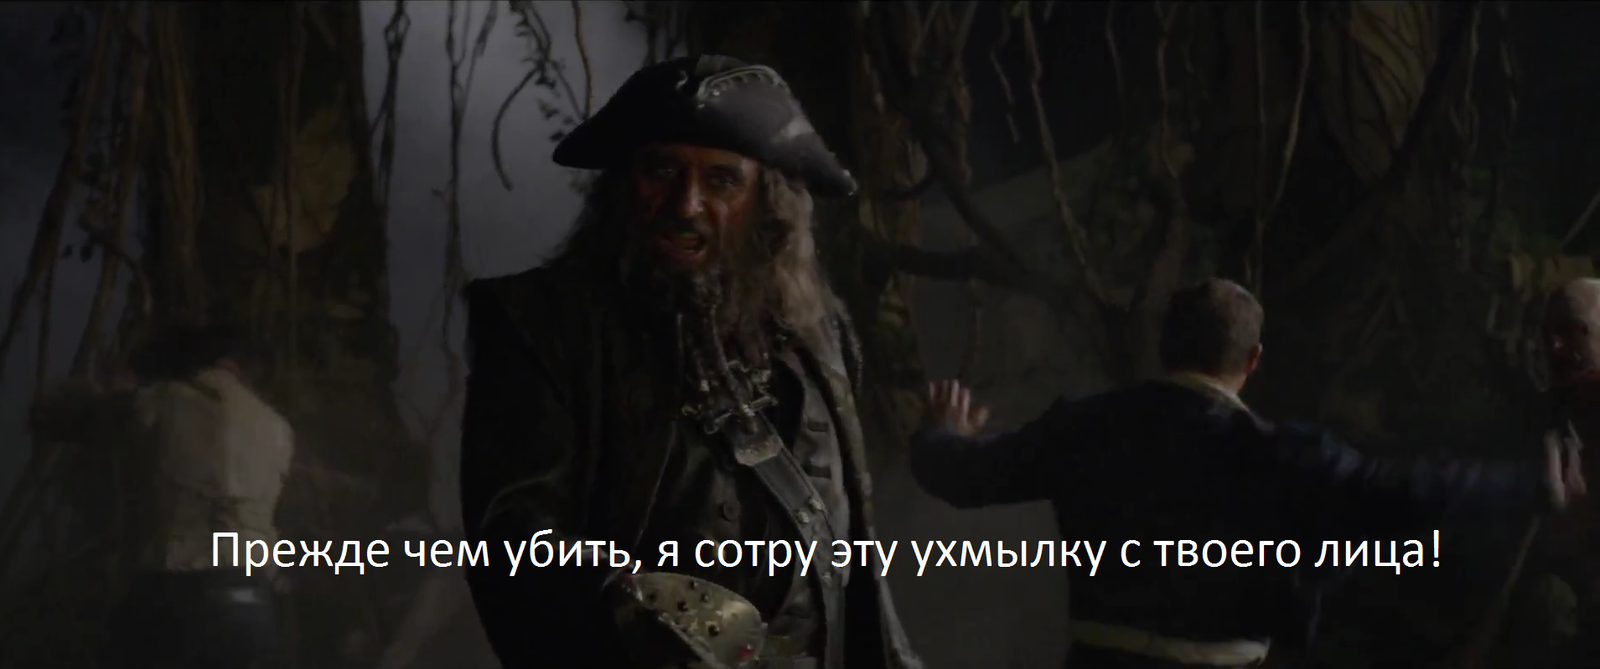 sudden advertising - Pirates of the Caribbean, Big Russian Boss, Advertising